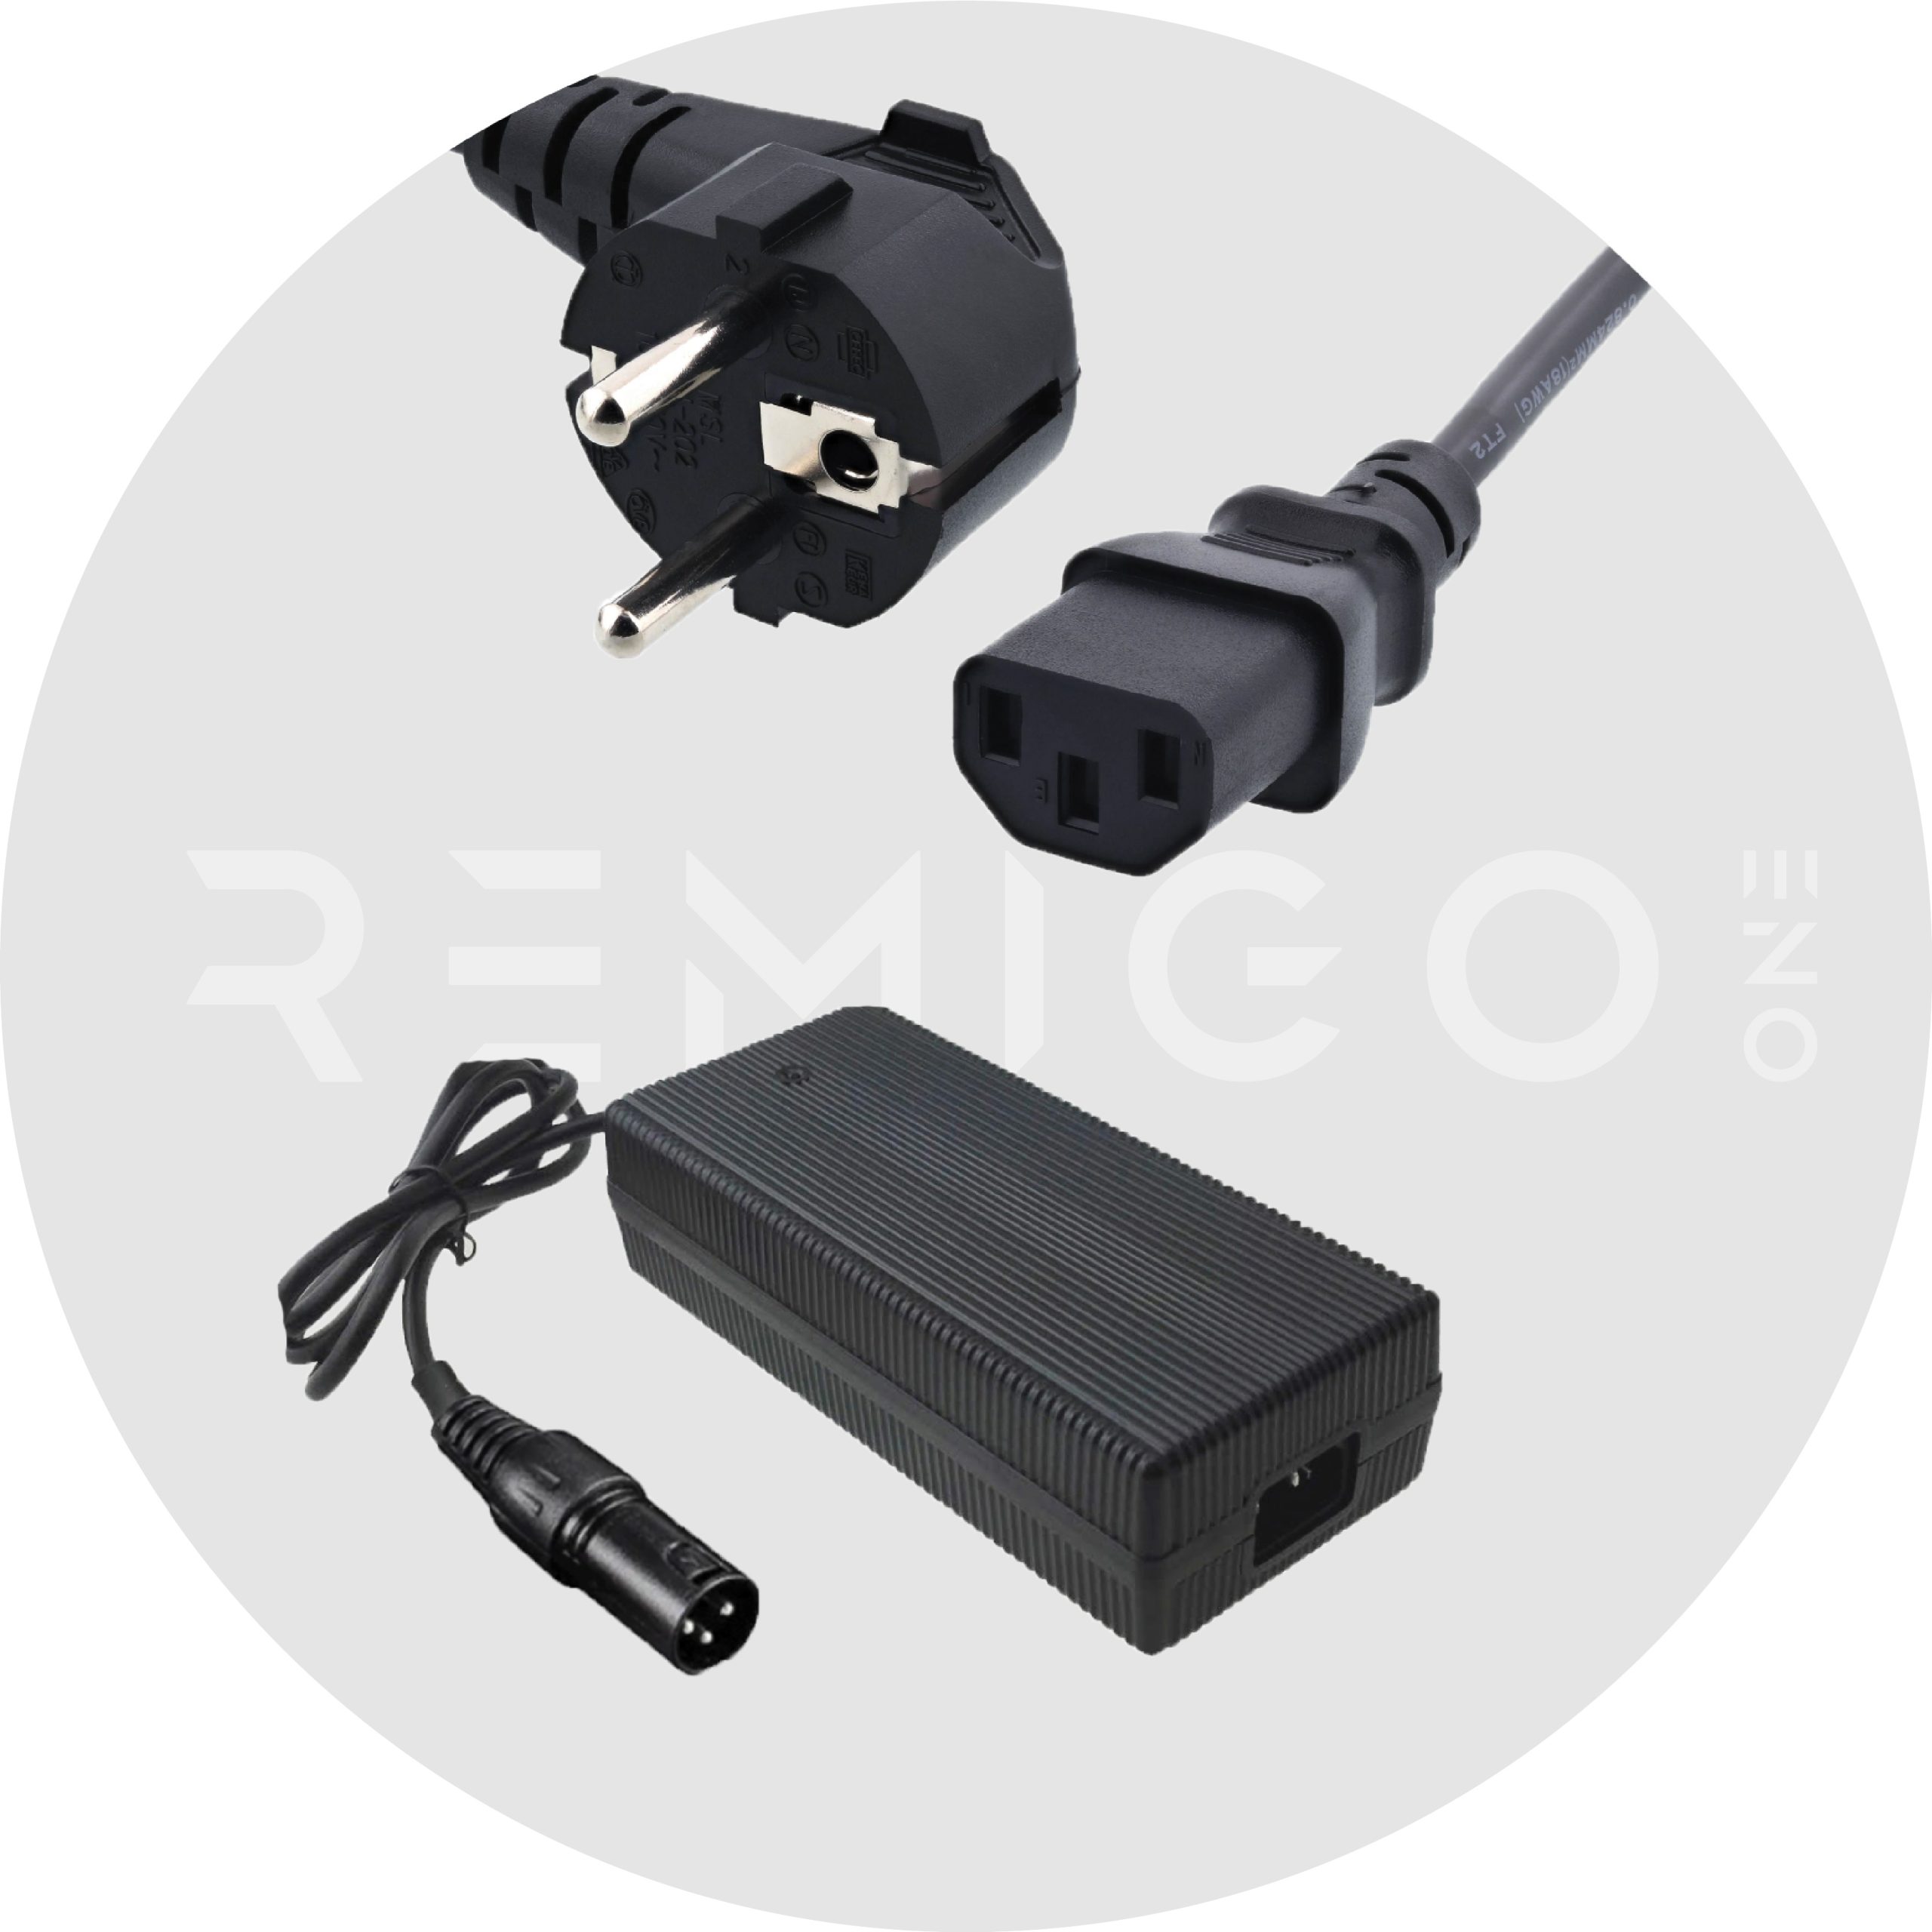 AC charger for an electric outboard RemigoOne with EU plug on a grey branded background